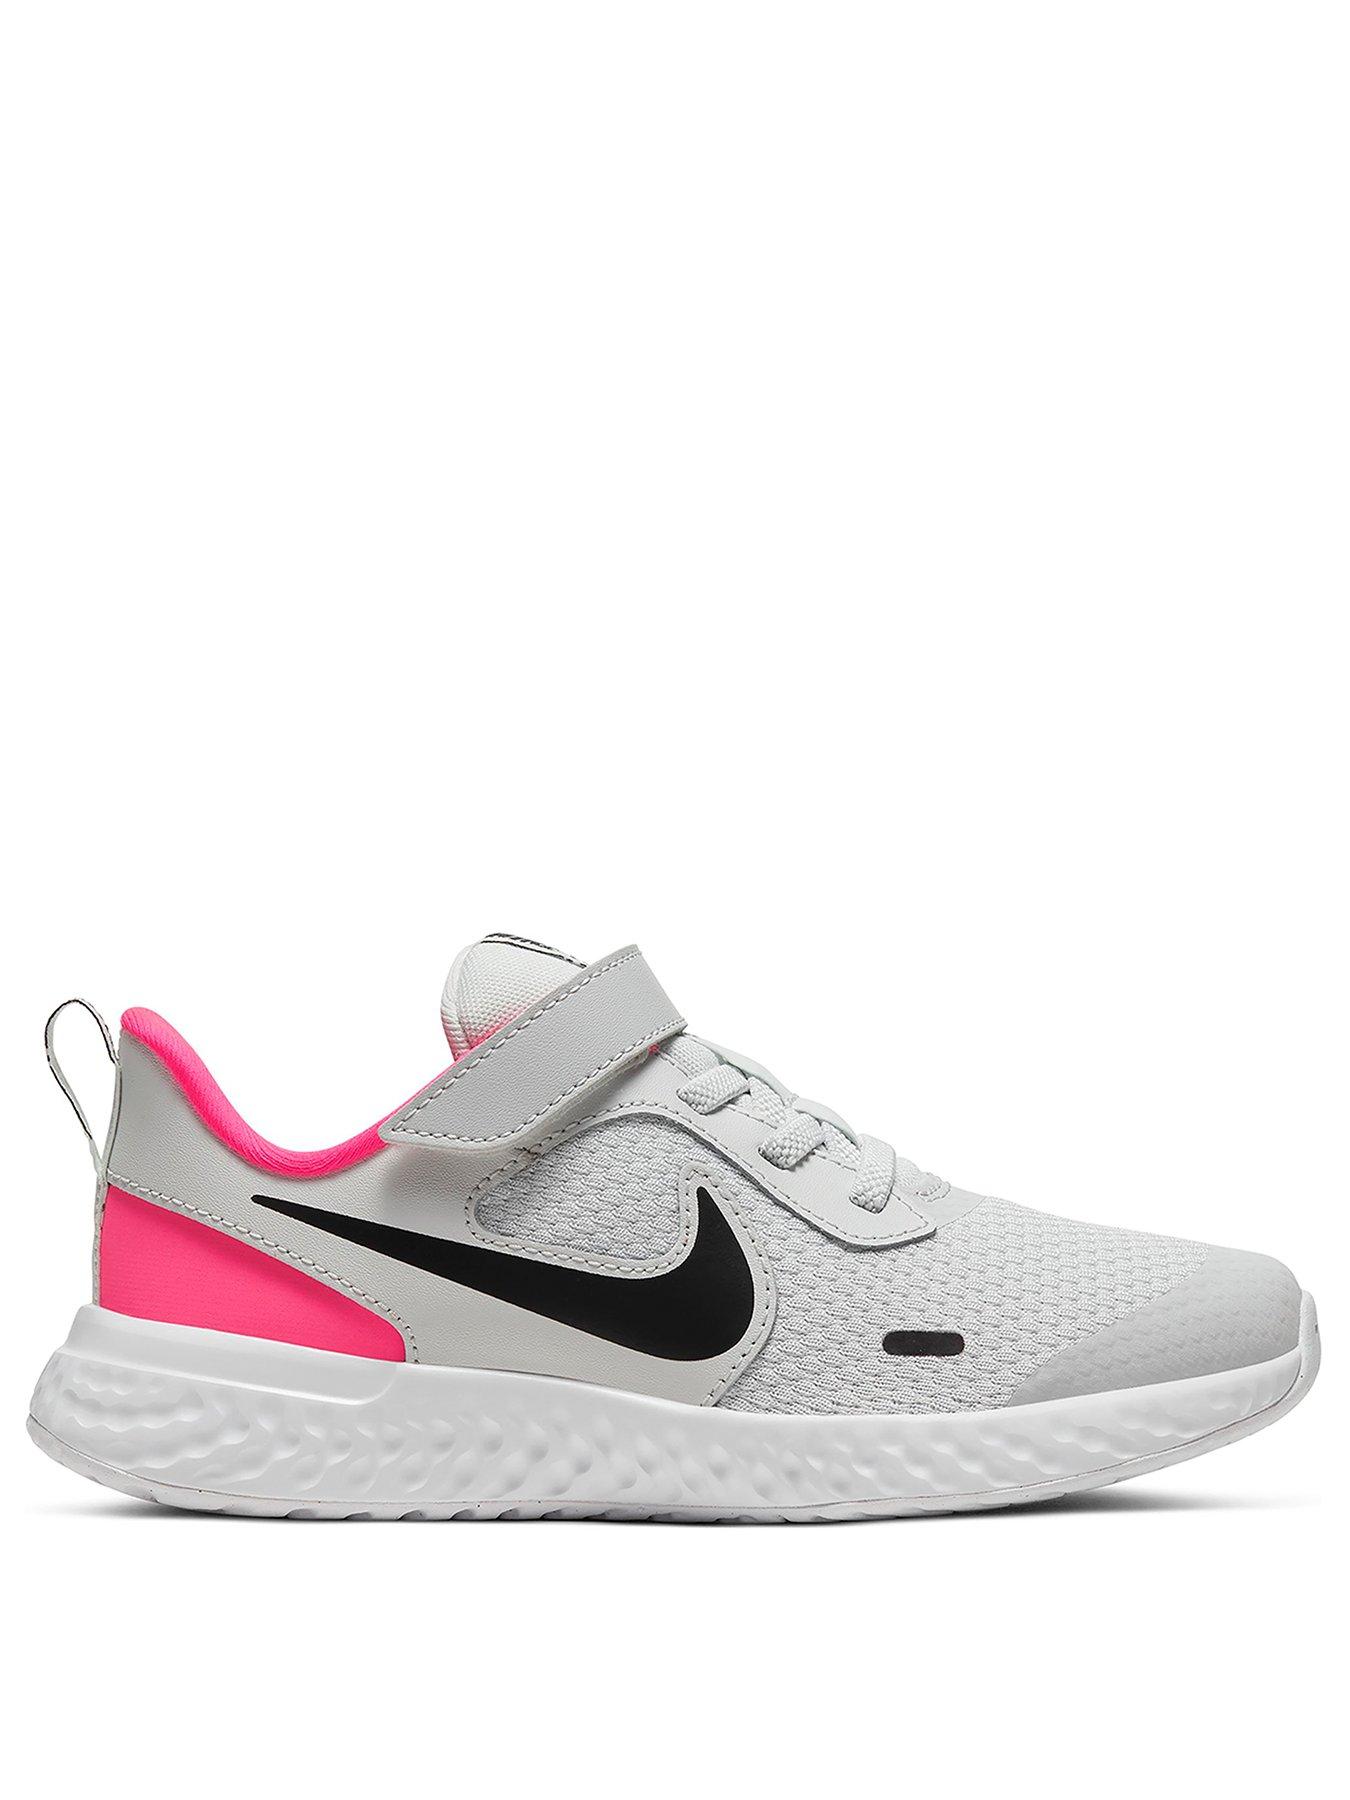 nike trainers girls size 5